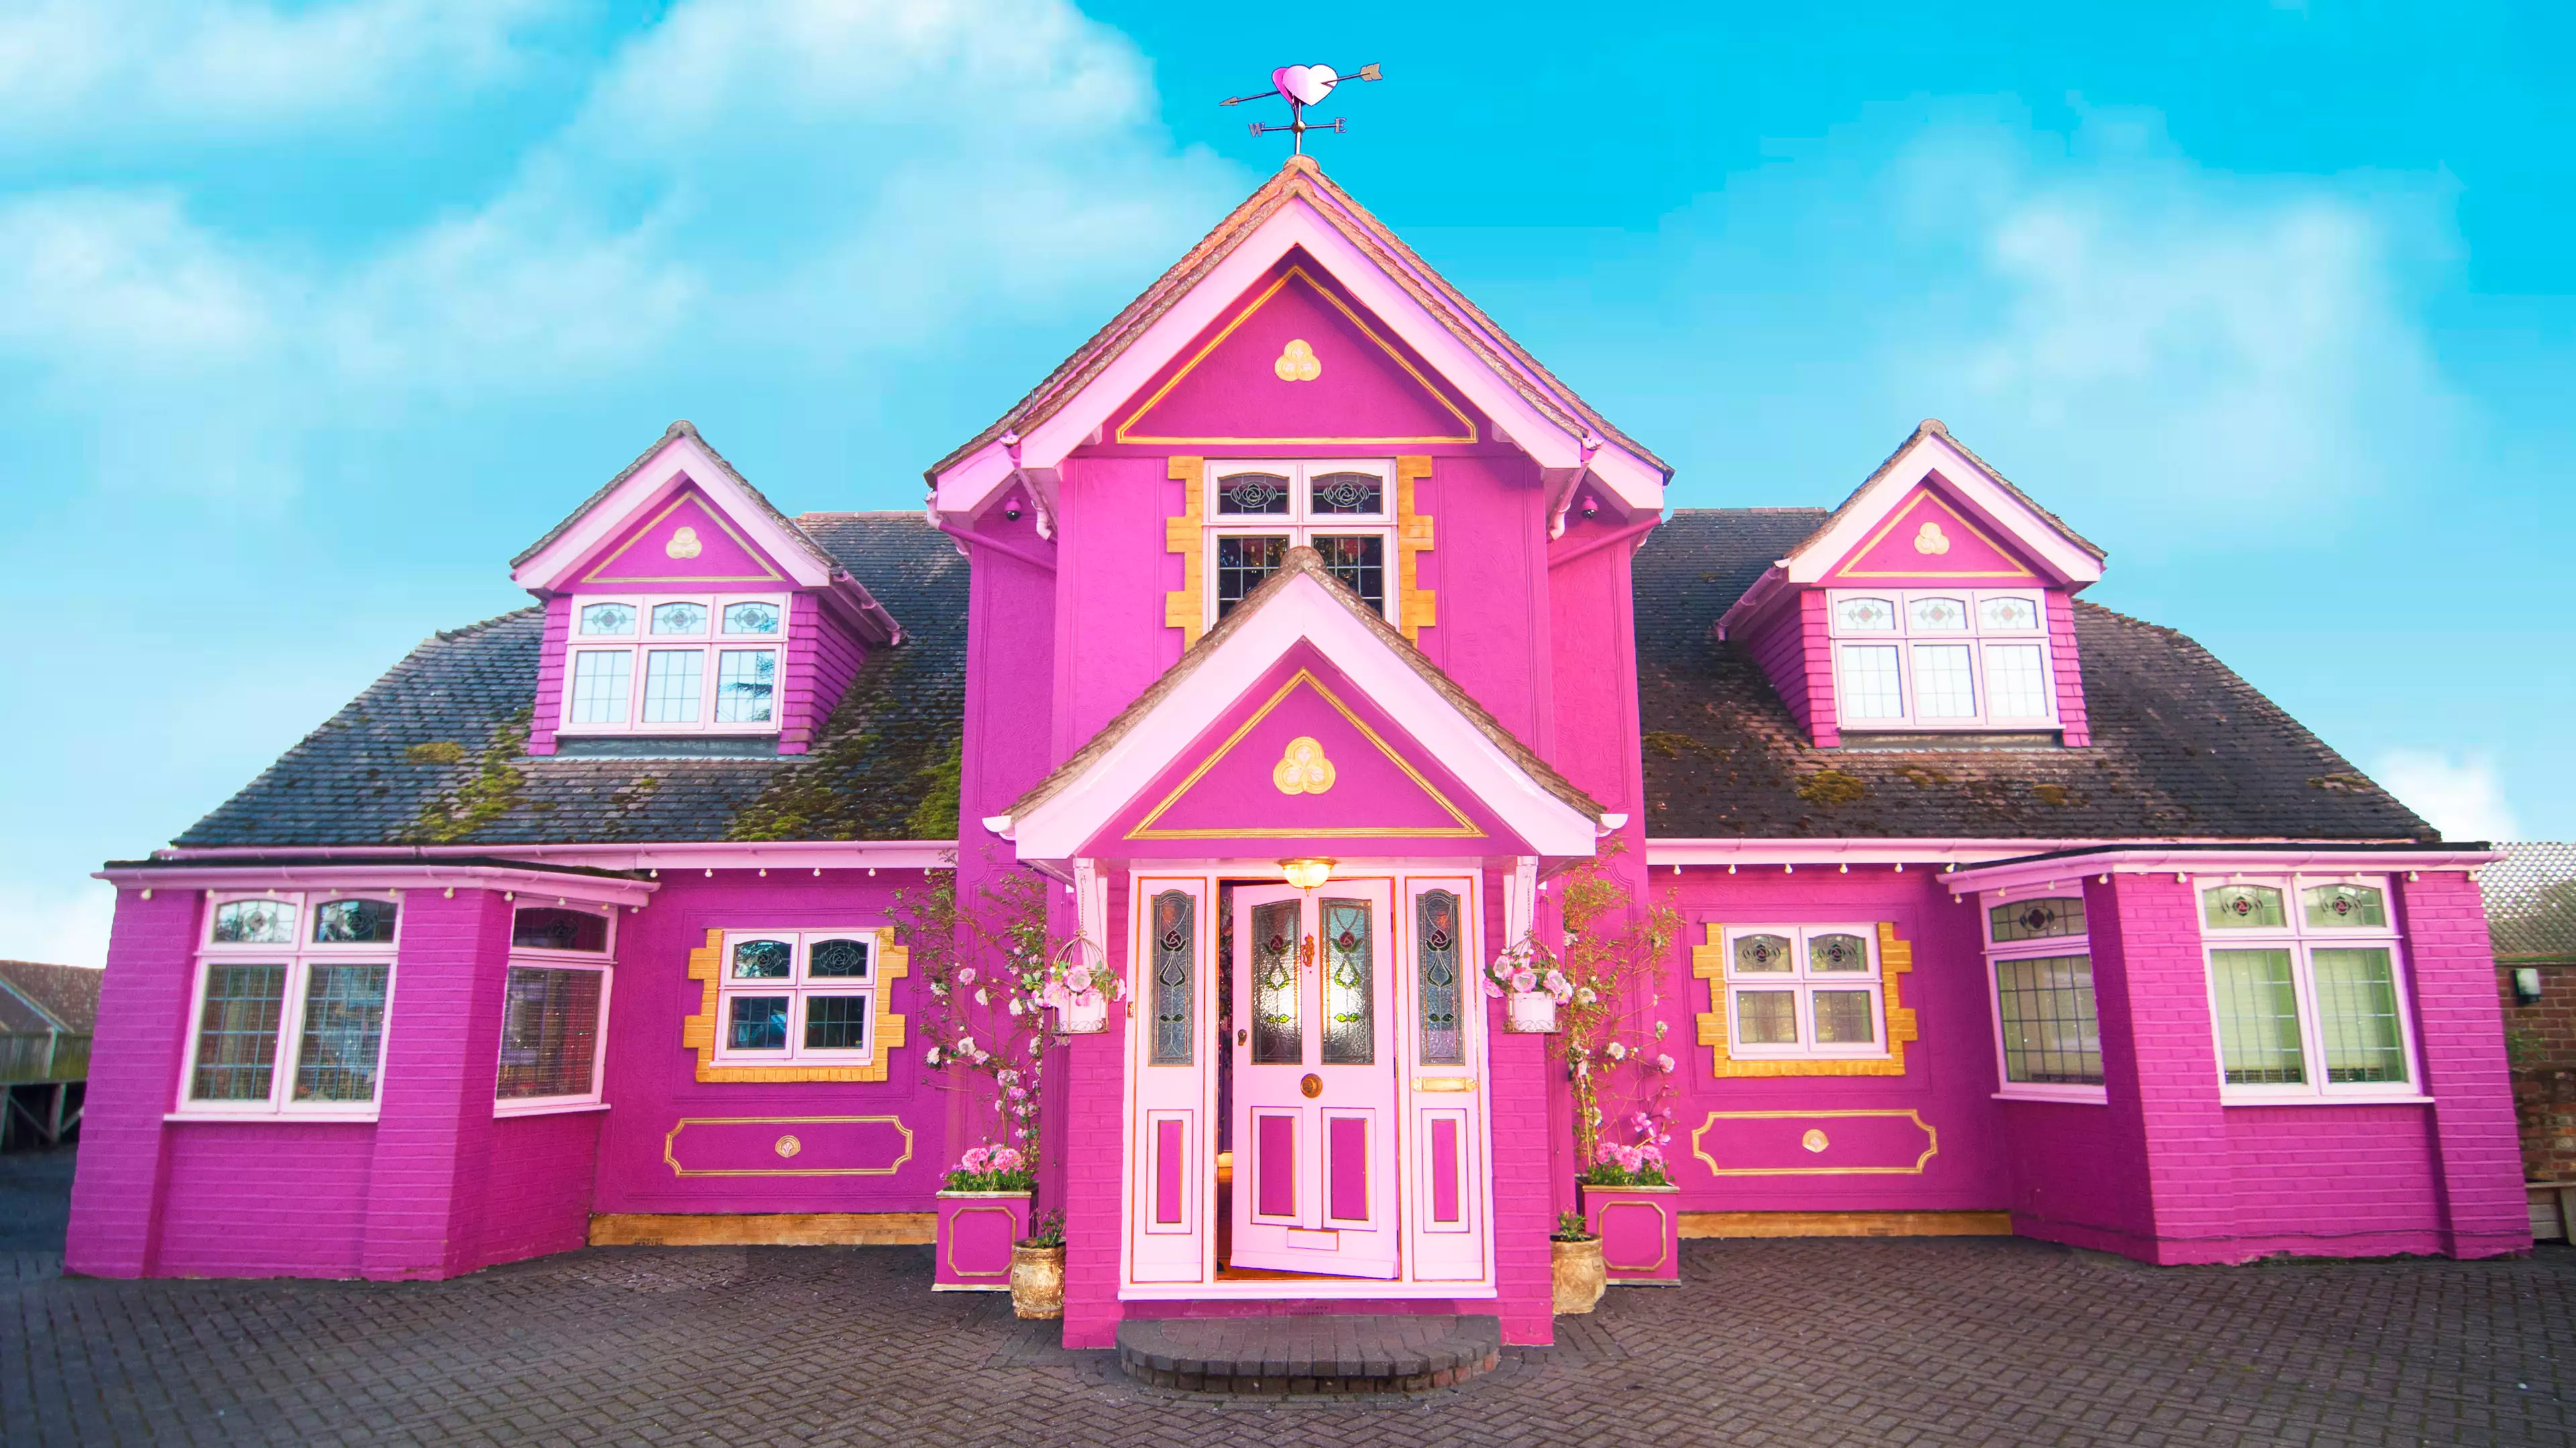 This Pink Airbnb Mansion In Essex Is The Ultimate Hen Party Palace